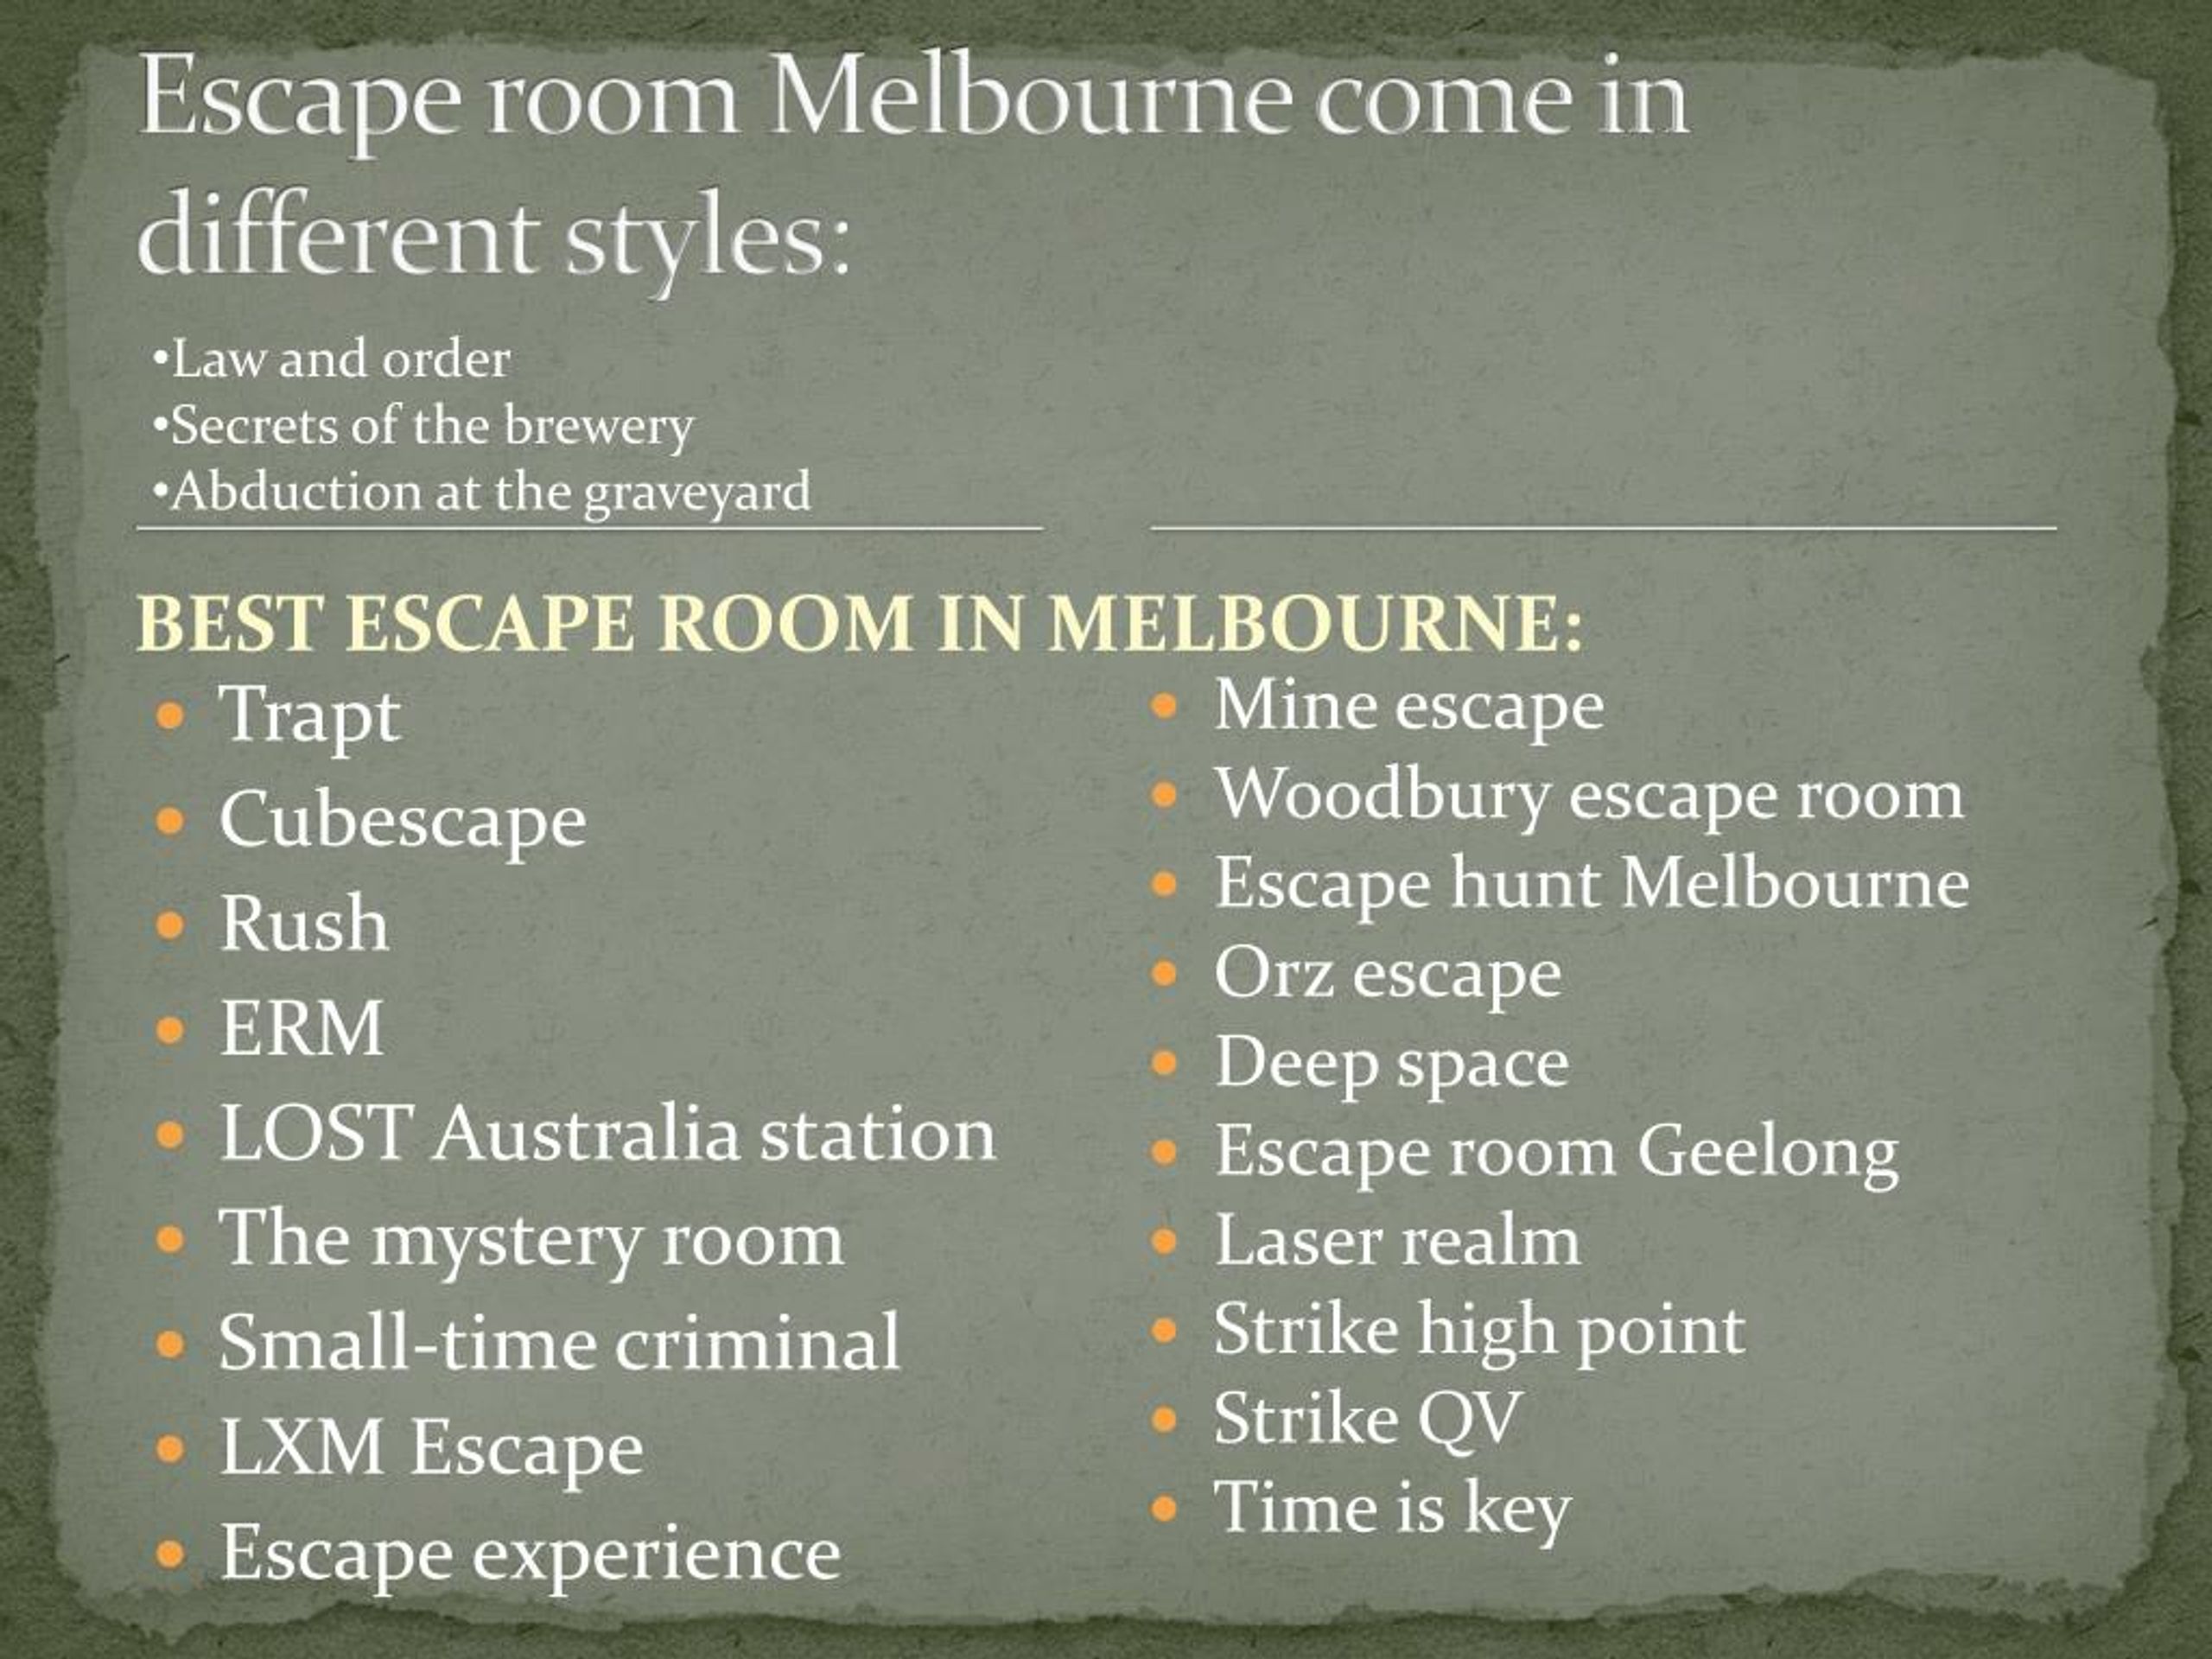 The best escape rooms in Melbourne